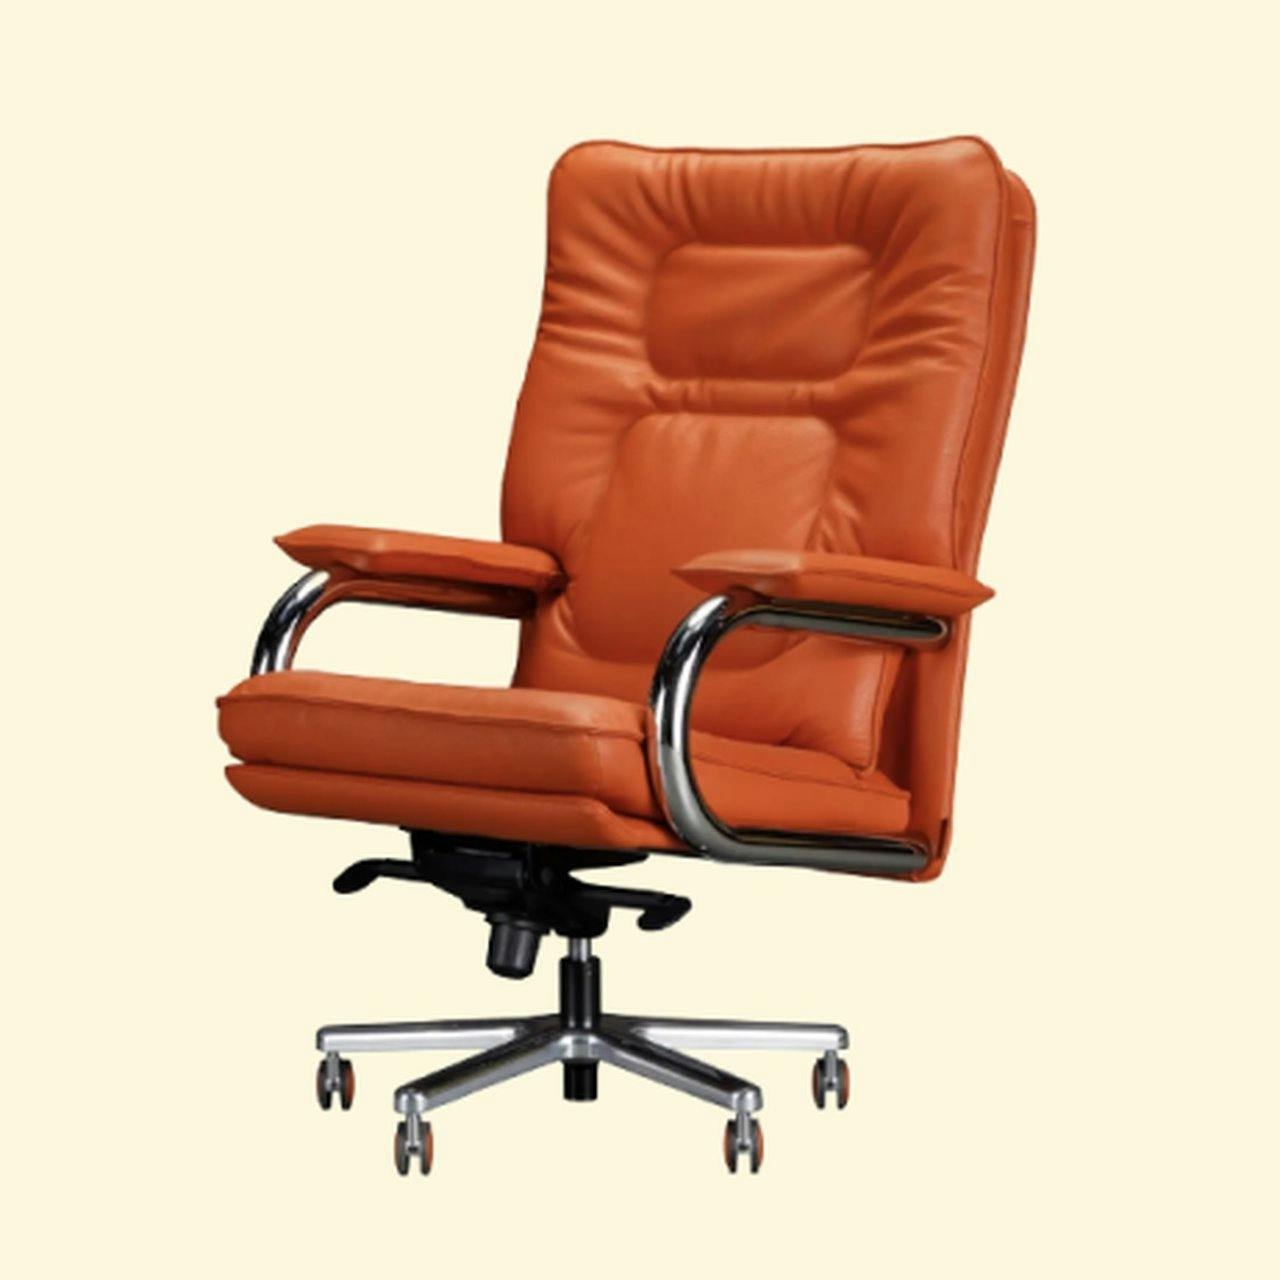 Arne Jacobsen Office chairs